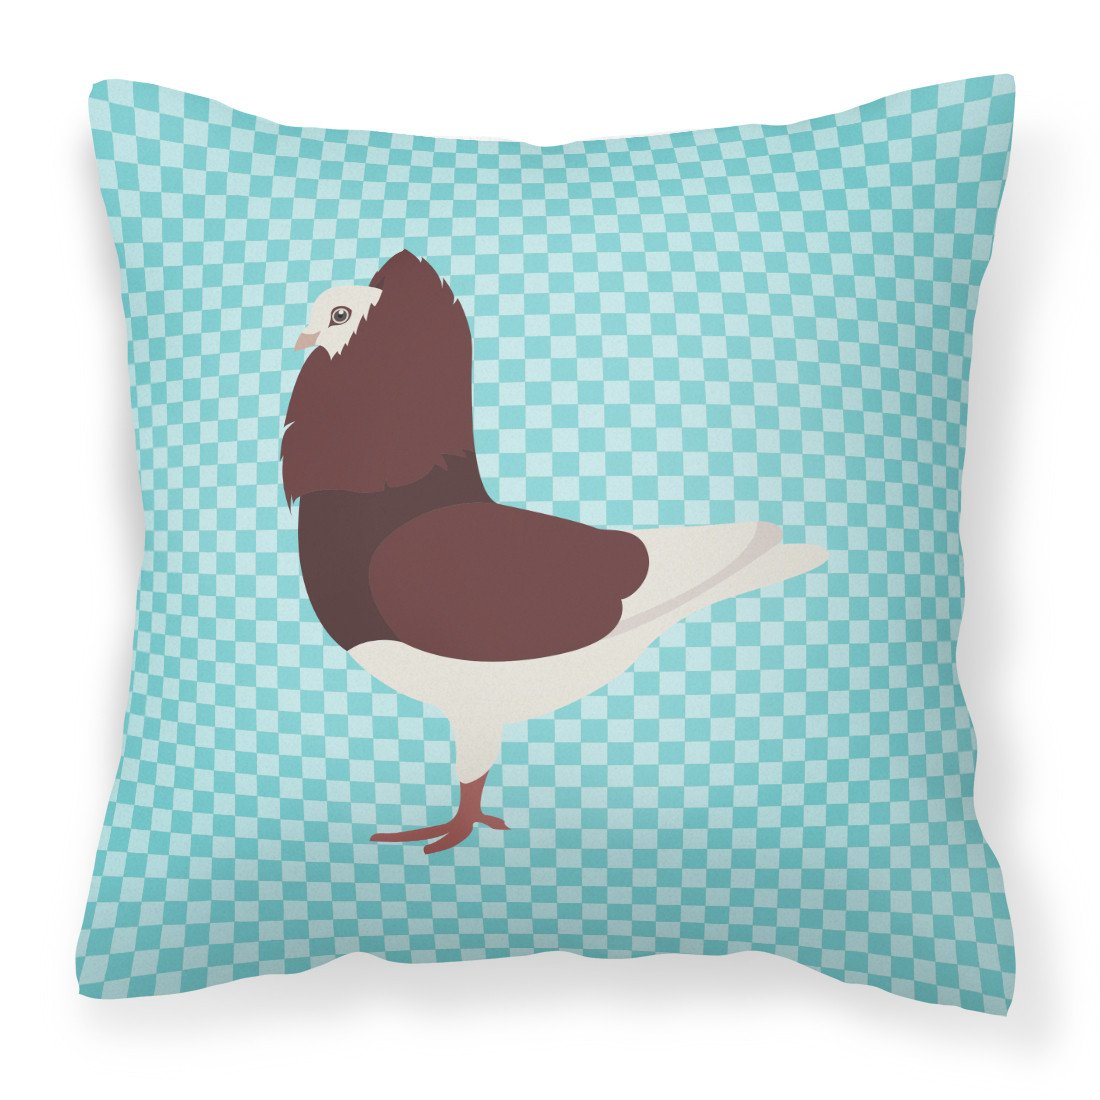 Capuchin Red Pigeon Blue Check Fabric Decorative Pillow BB8122PW1818 by Caroline's Treasures